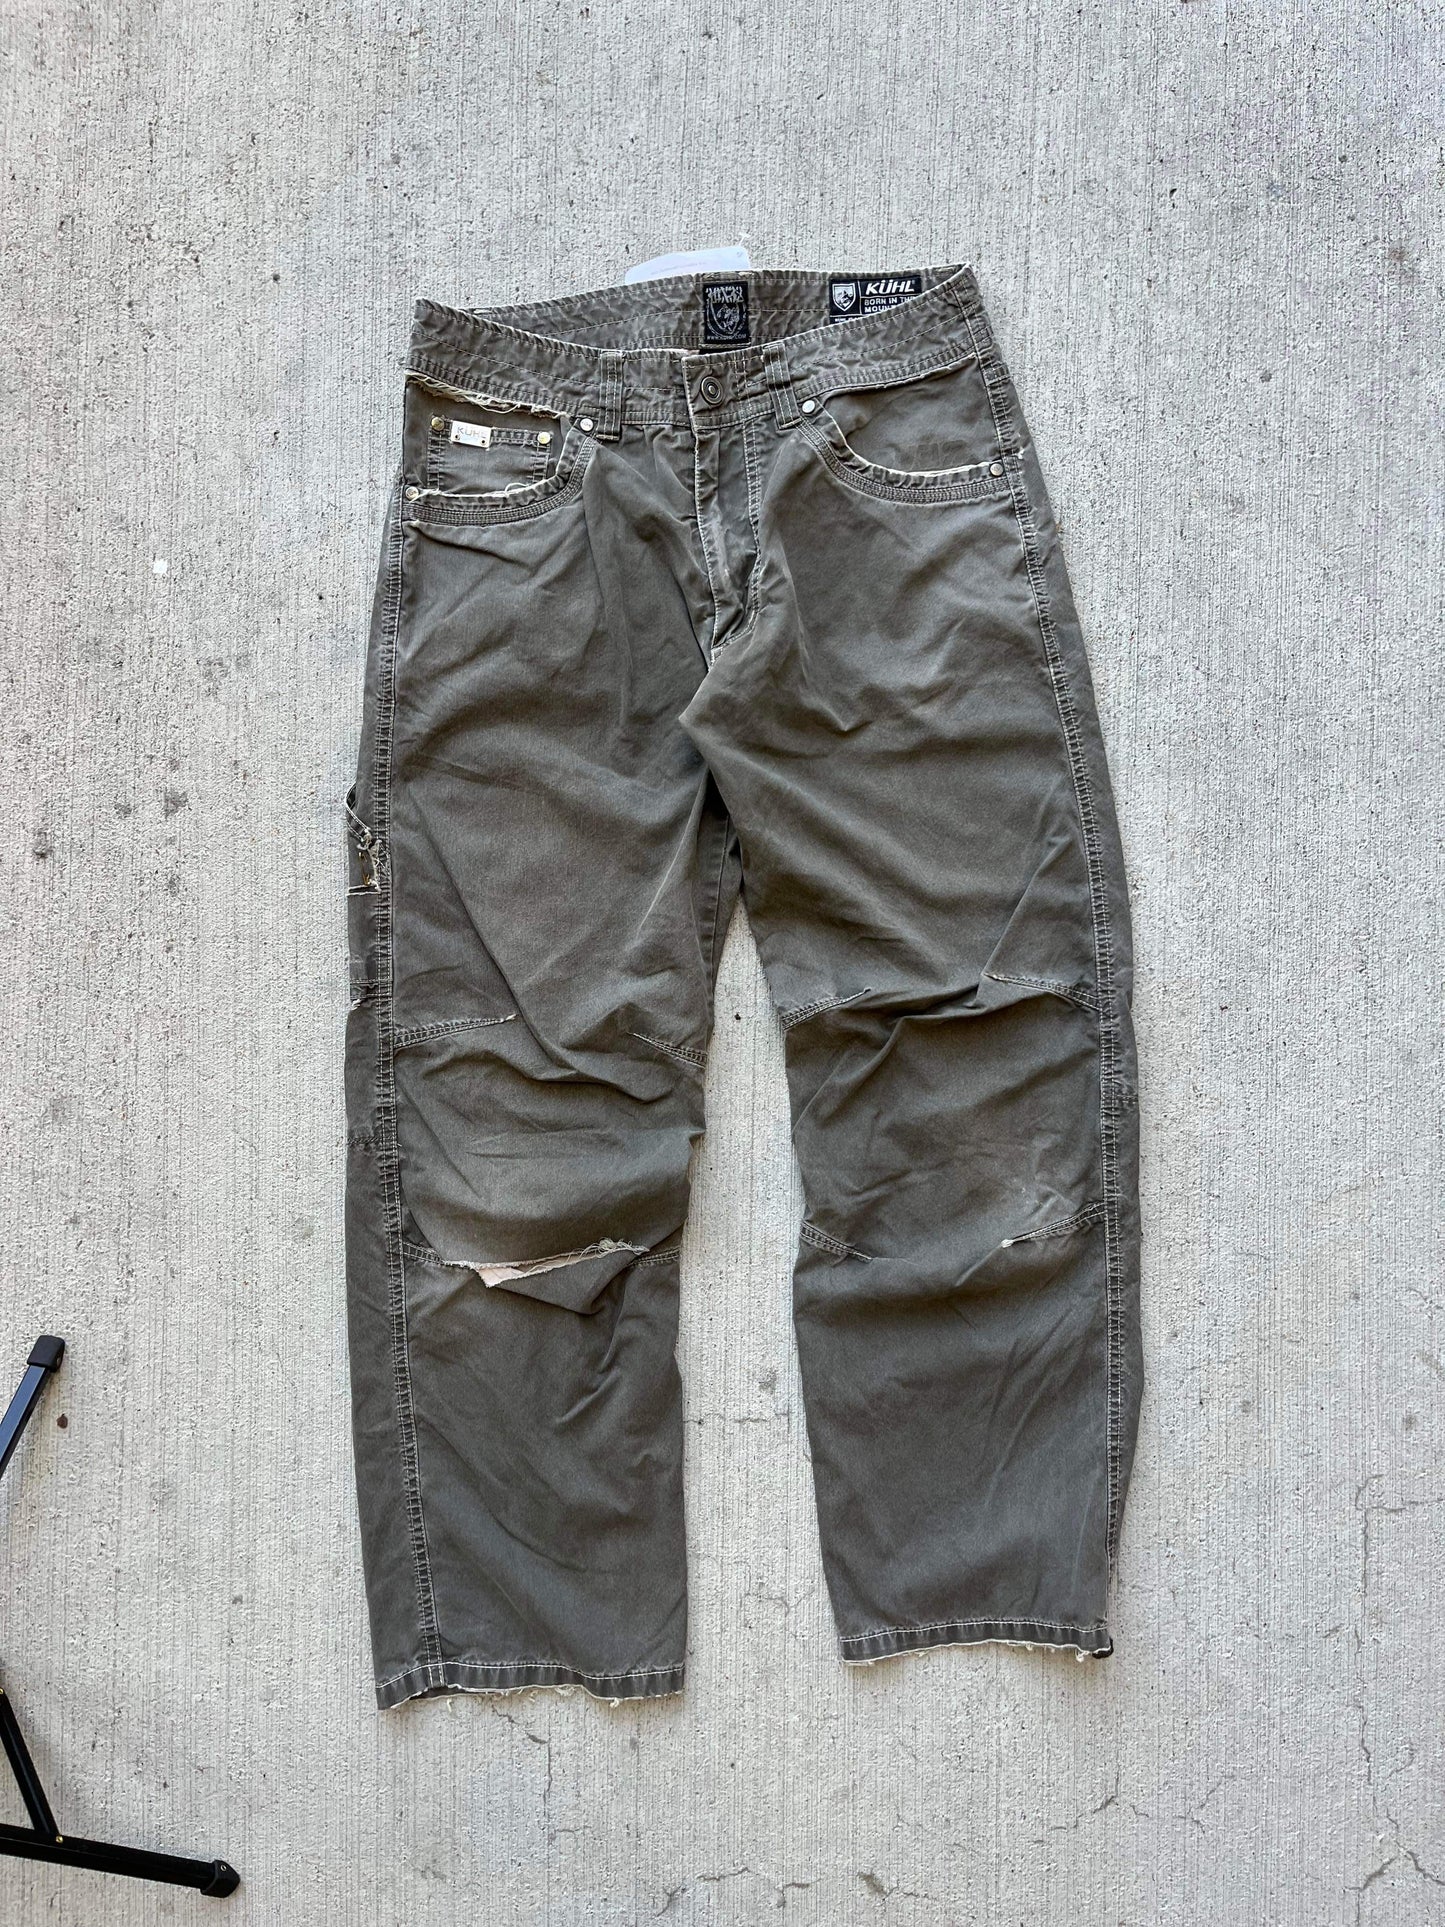 (31”) Kuhl Distressed Sunfaded Carpenters